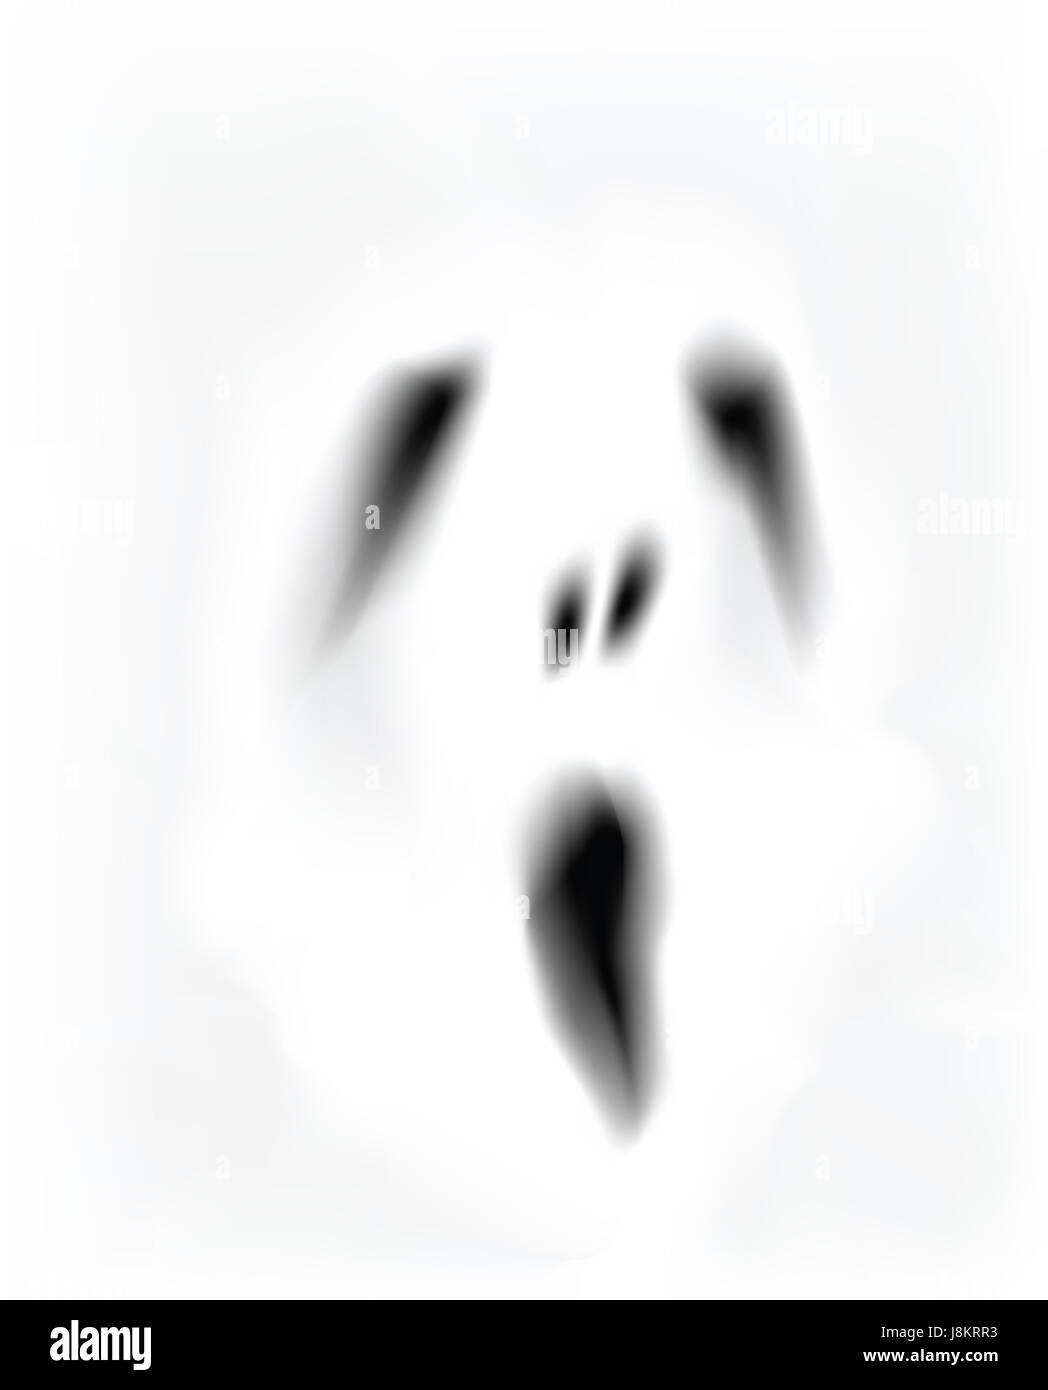 Frightened Ghost Face Vector Icon Halloween Emoji Scary Evil